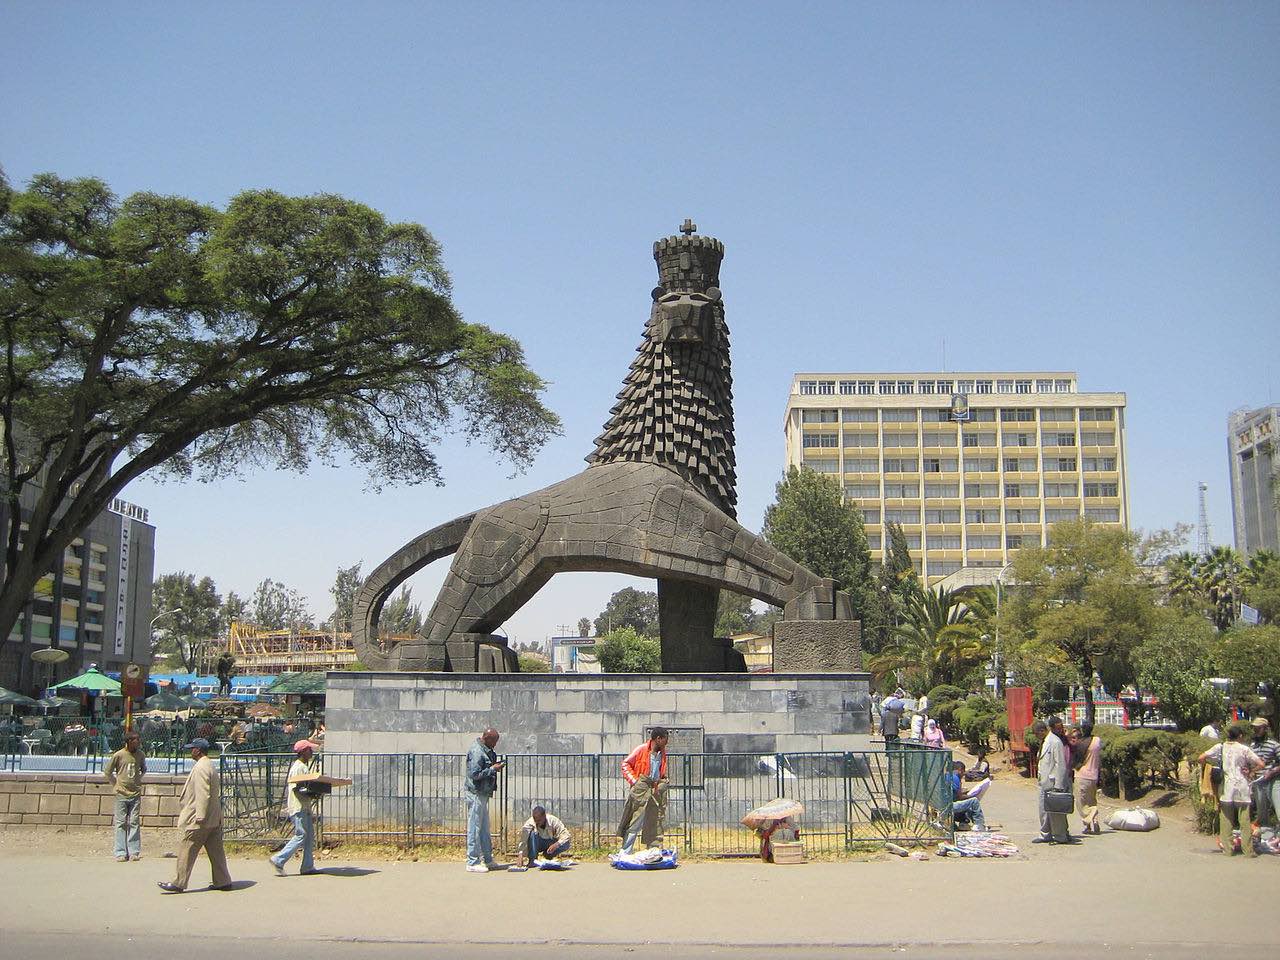 What Are the Most Popular Tourists Attractions at Addis Ababa?